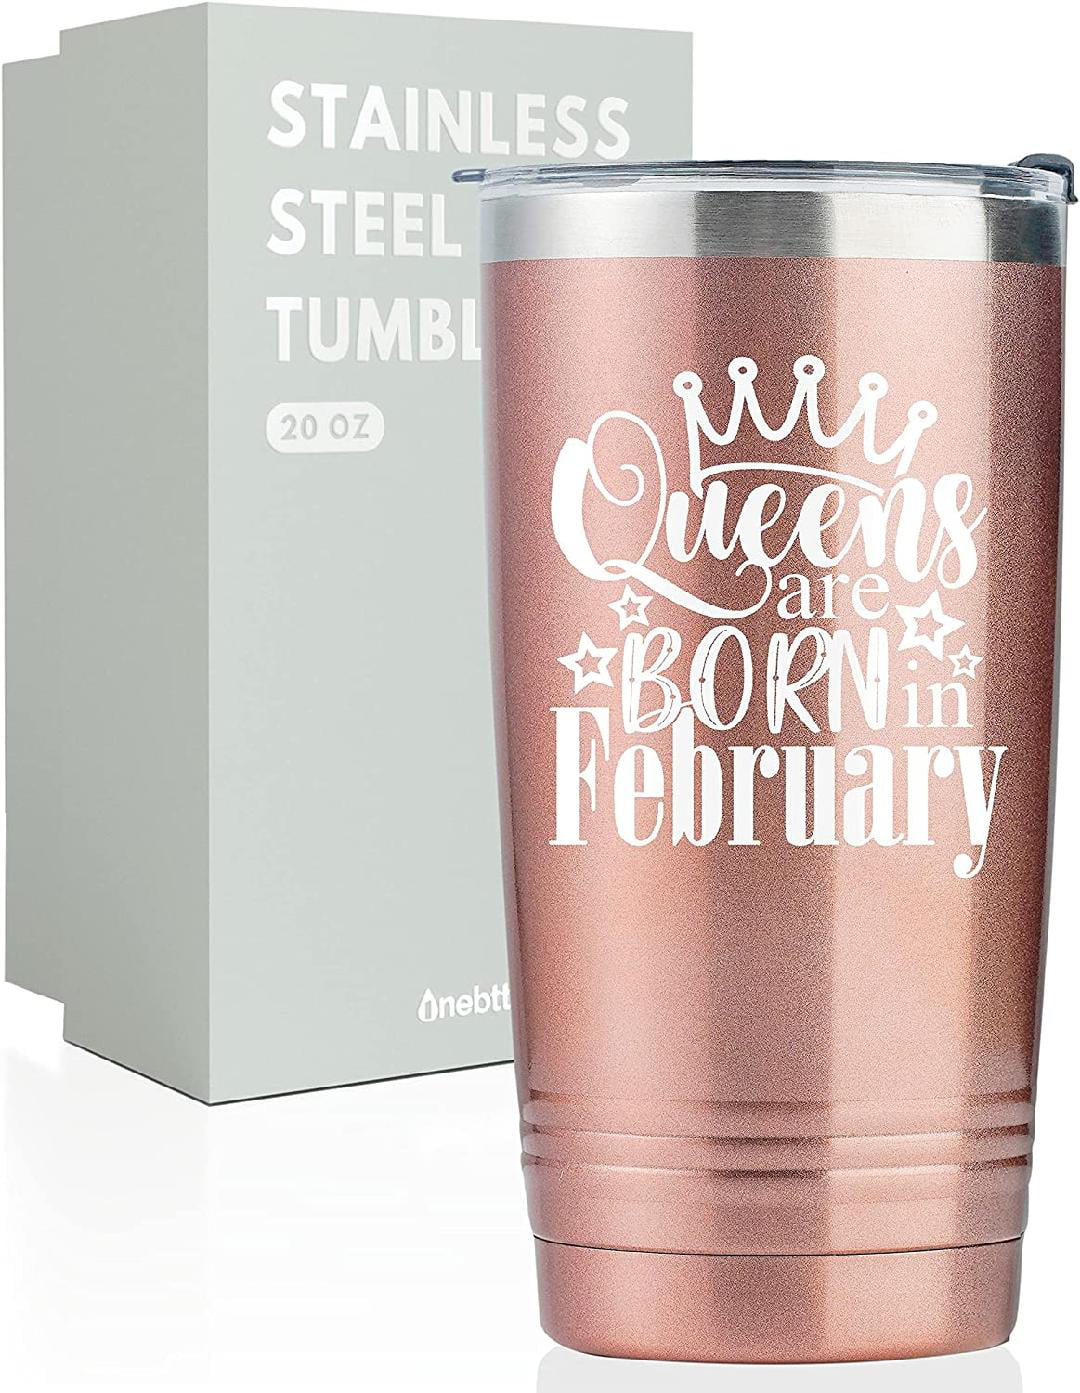 ATHAND Best Birthday Gifts for Barbie Girls Coworker  Friends,Burn Book Mean Girls Skinny Tumbler, 20 Oz Insulated Coffee Mug  with Lid,Pink Theme Cup with Funny Quetes for Hot & Cold